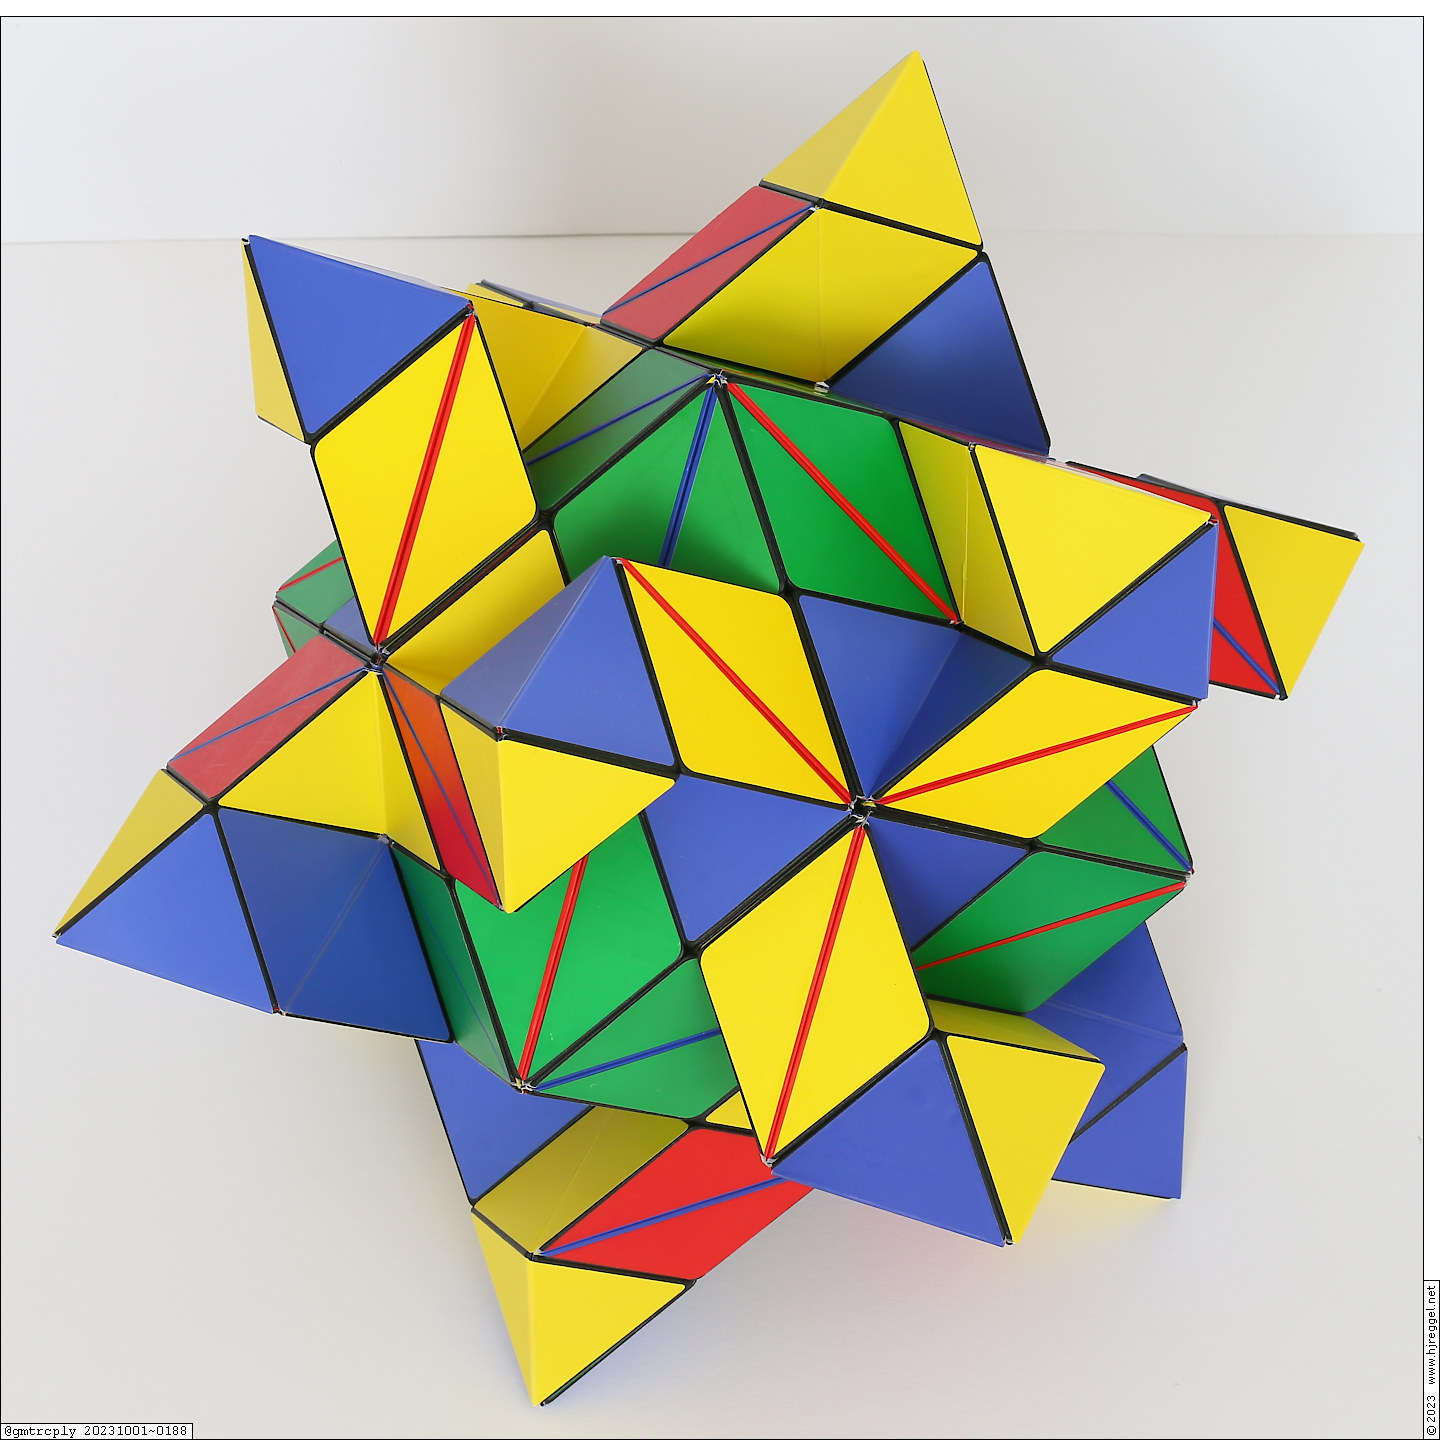 Twirlated Rhombic Dodecahedron